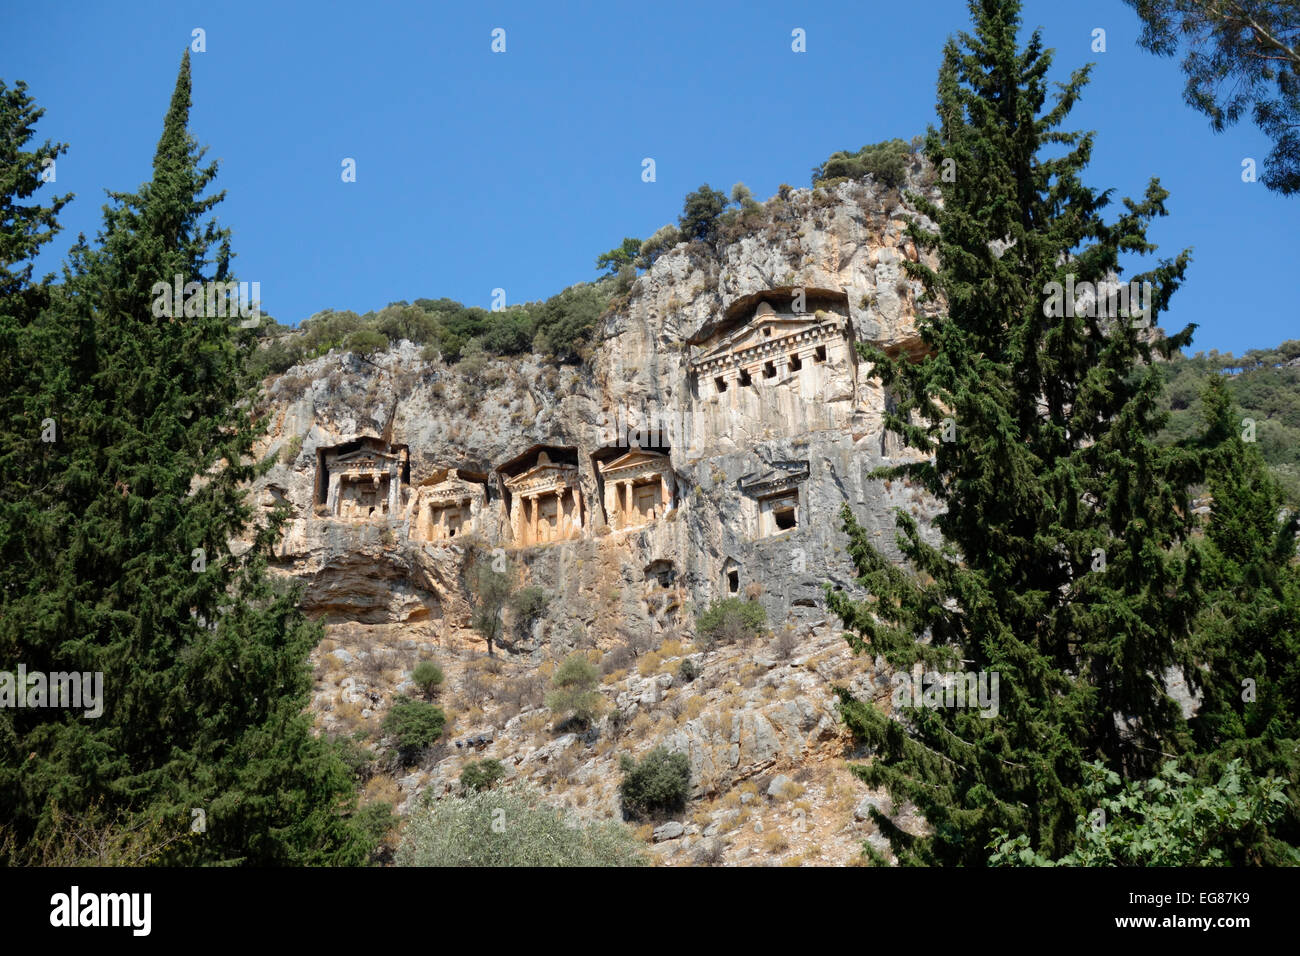 The Lycian rock tombs on the cliffs above the Dalyan river, Turkey Stock Photo